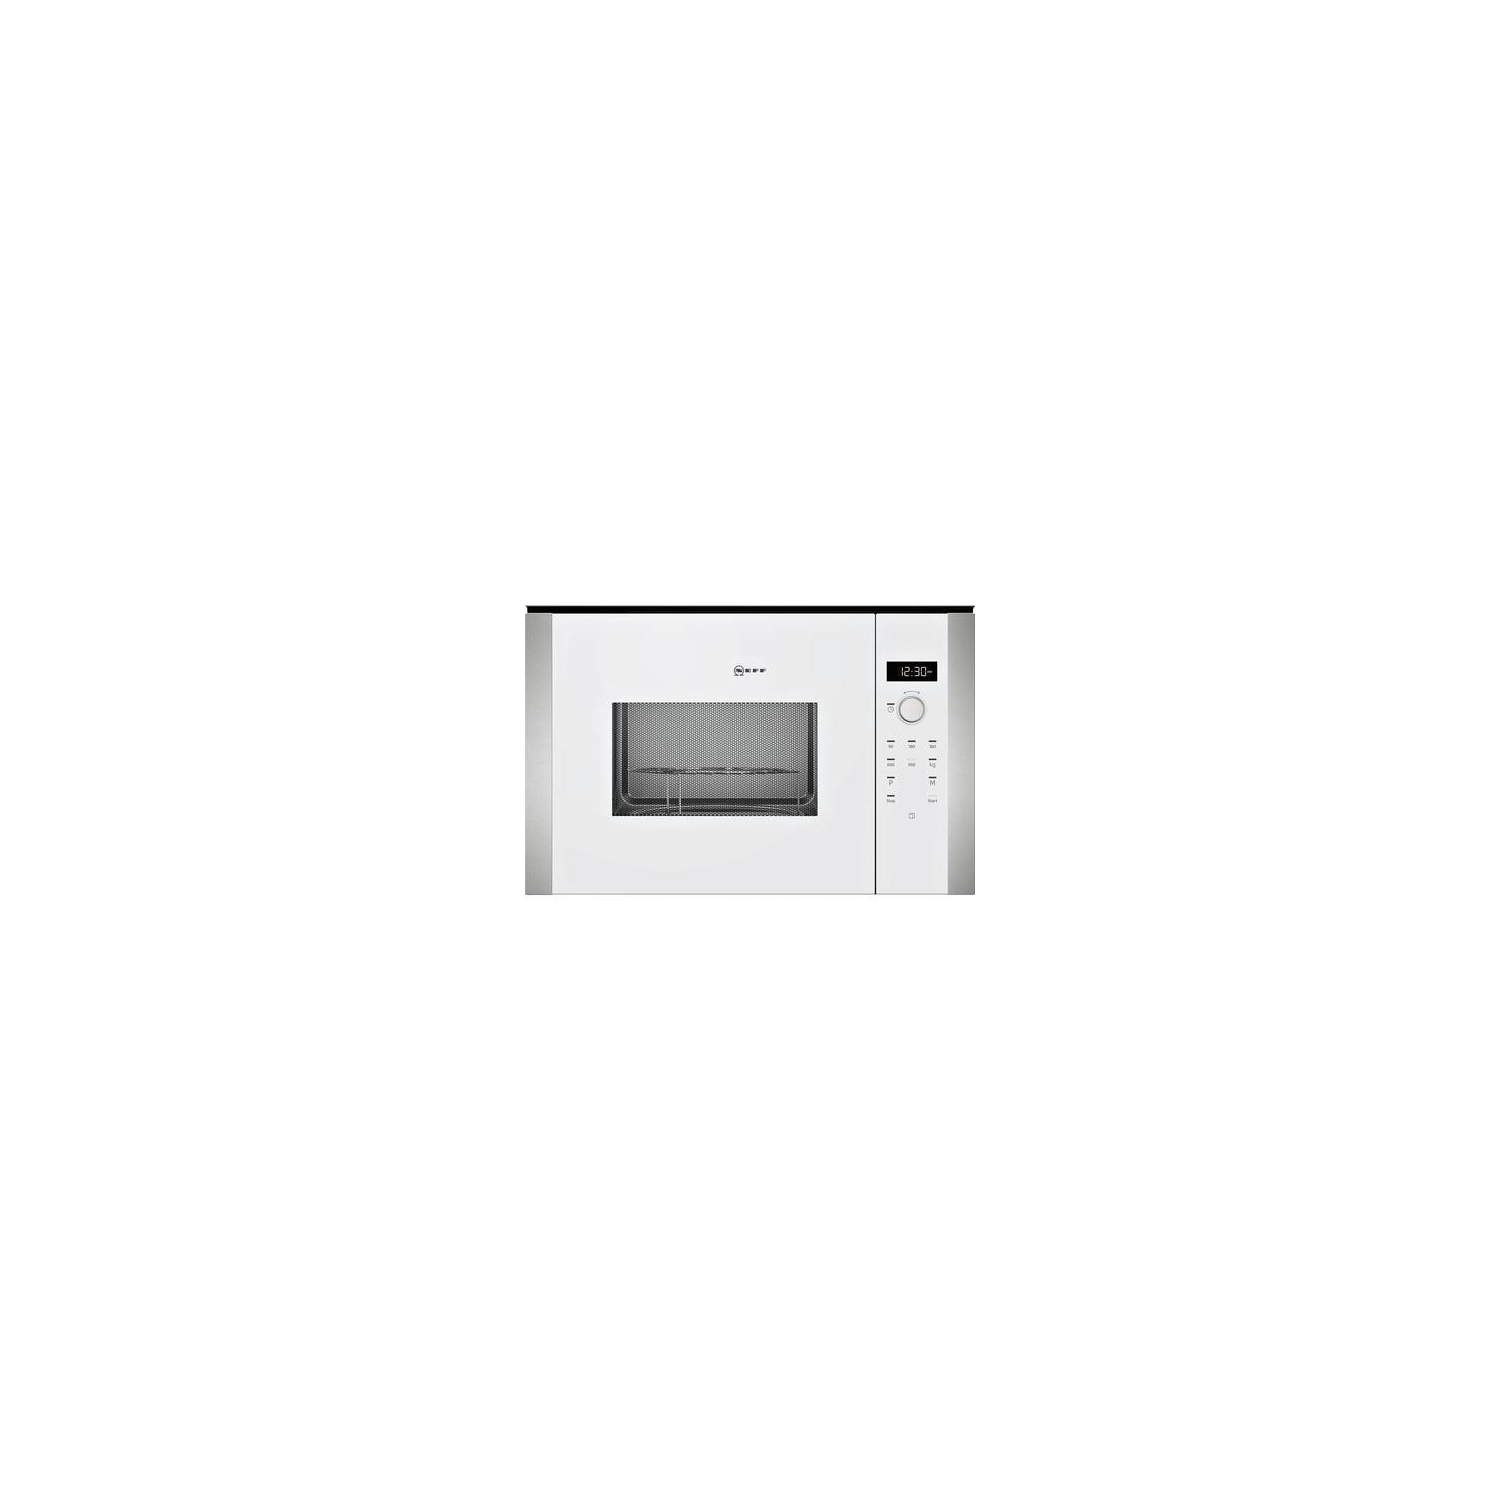 Neff N50 Built-In Microwave Oven - 0